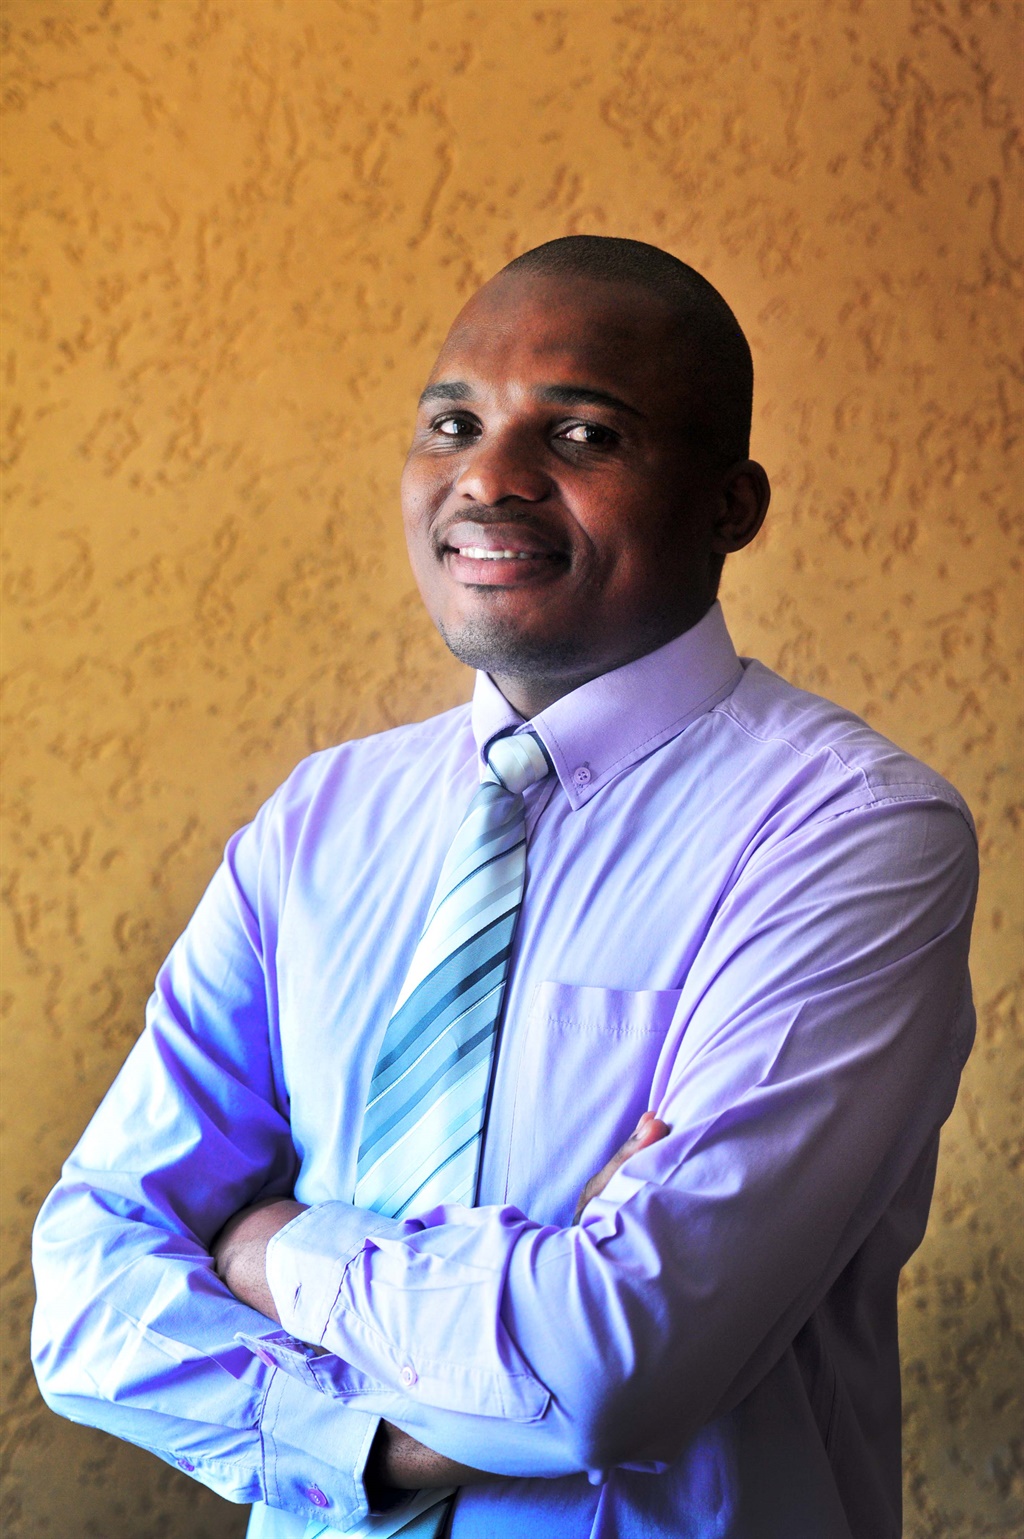 Zamokhule is a saver and wanted to develop a plan for his investments and savings. Picture: Leon Sadiki